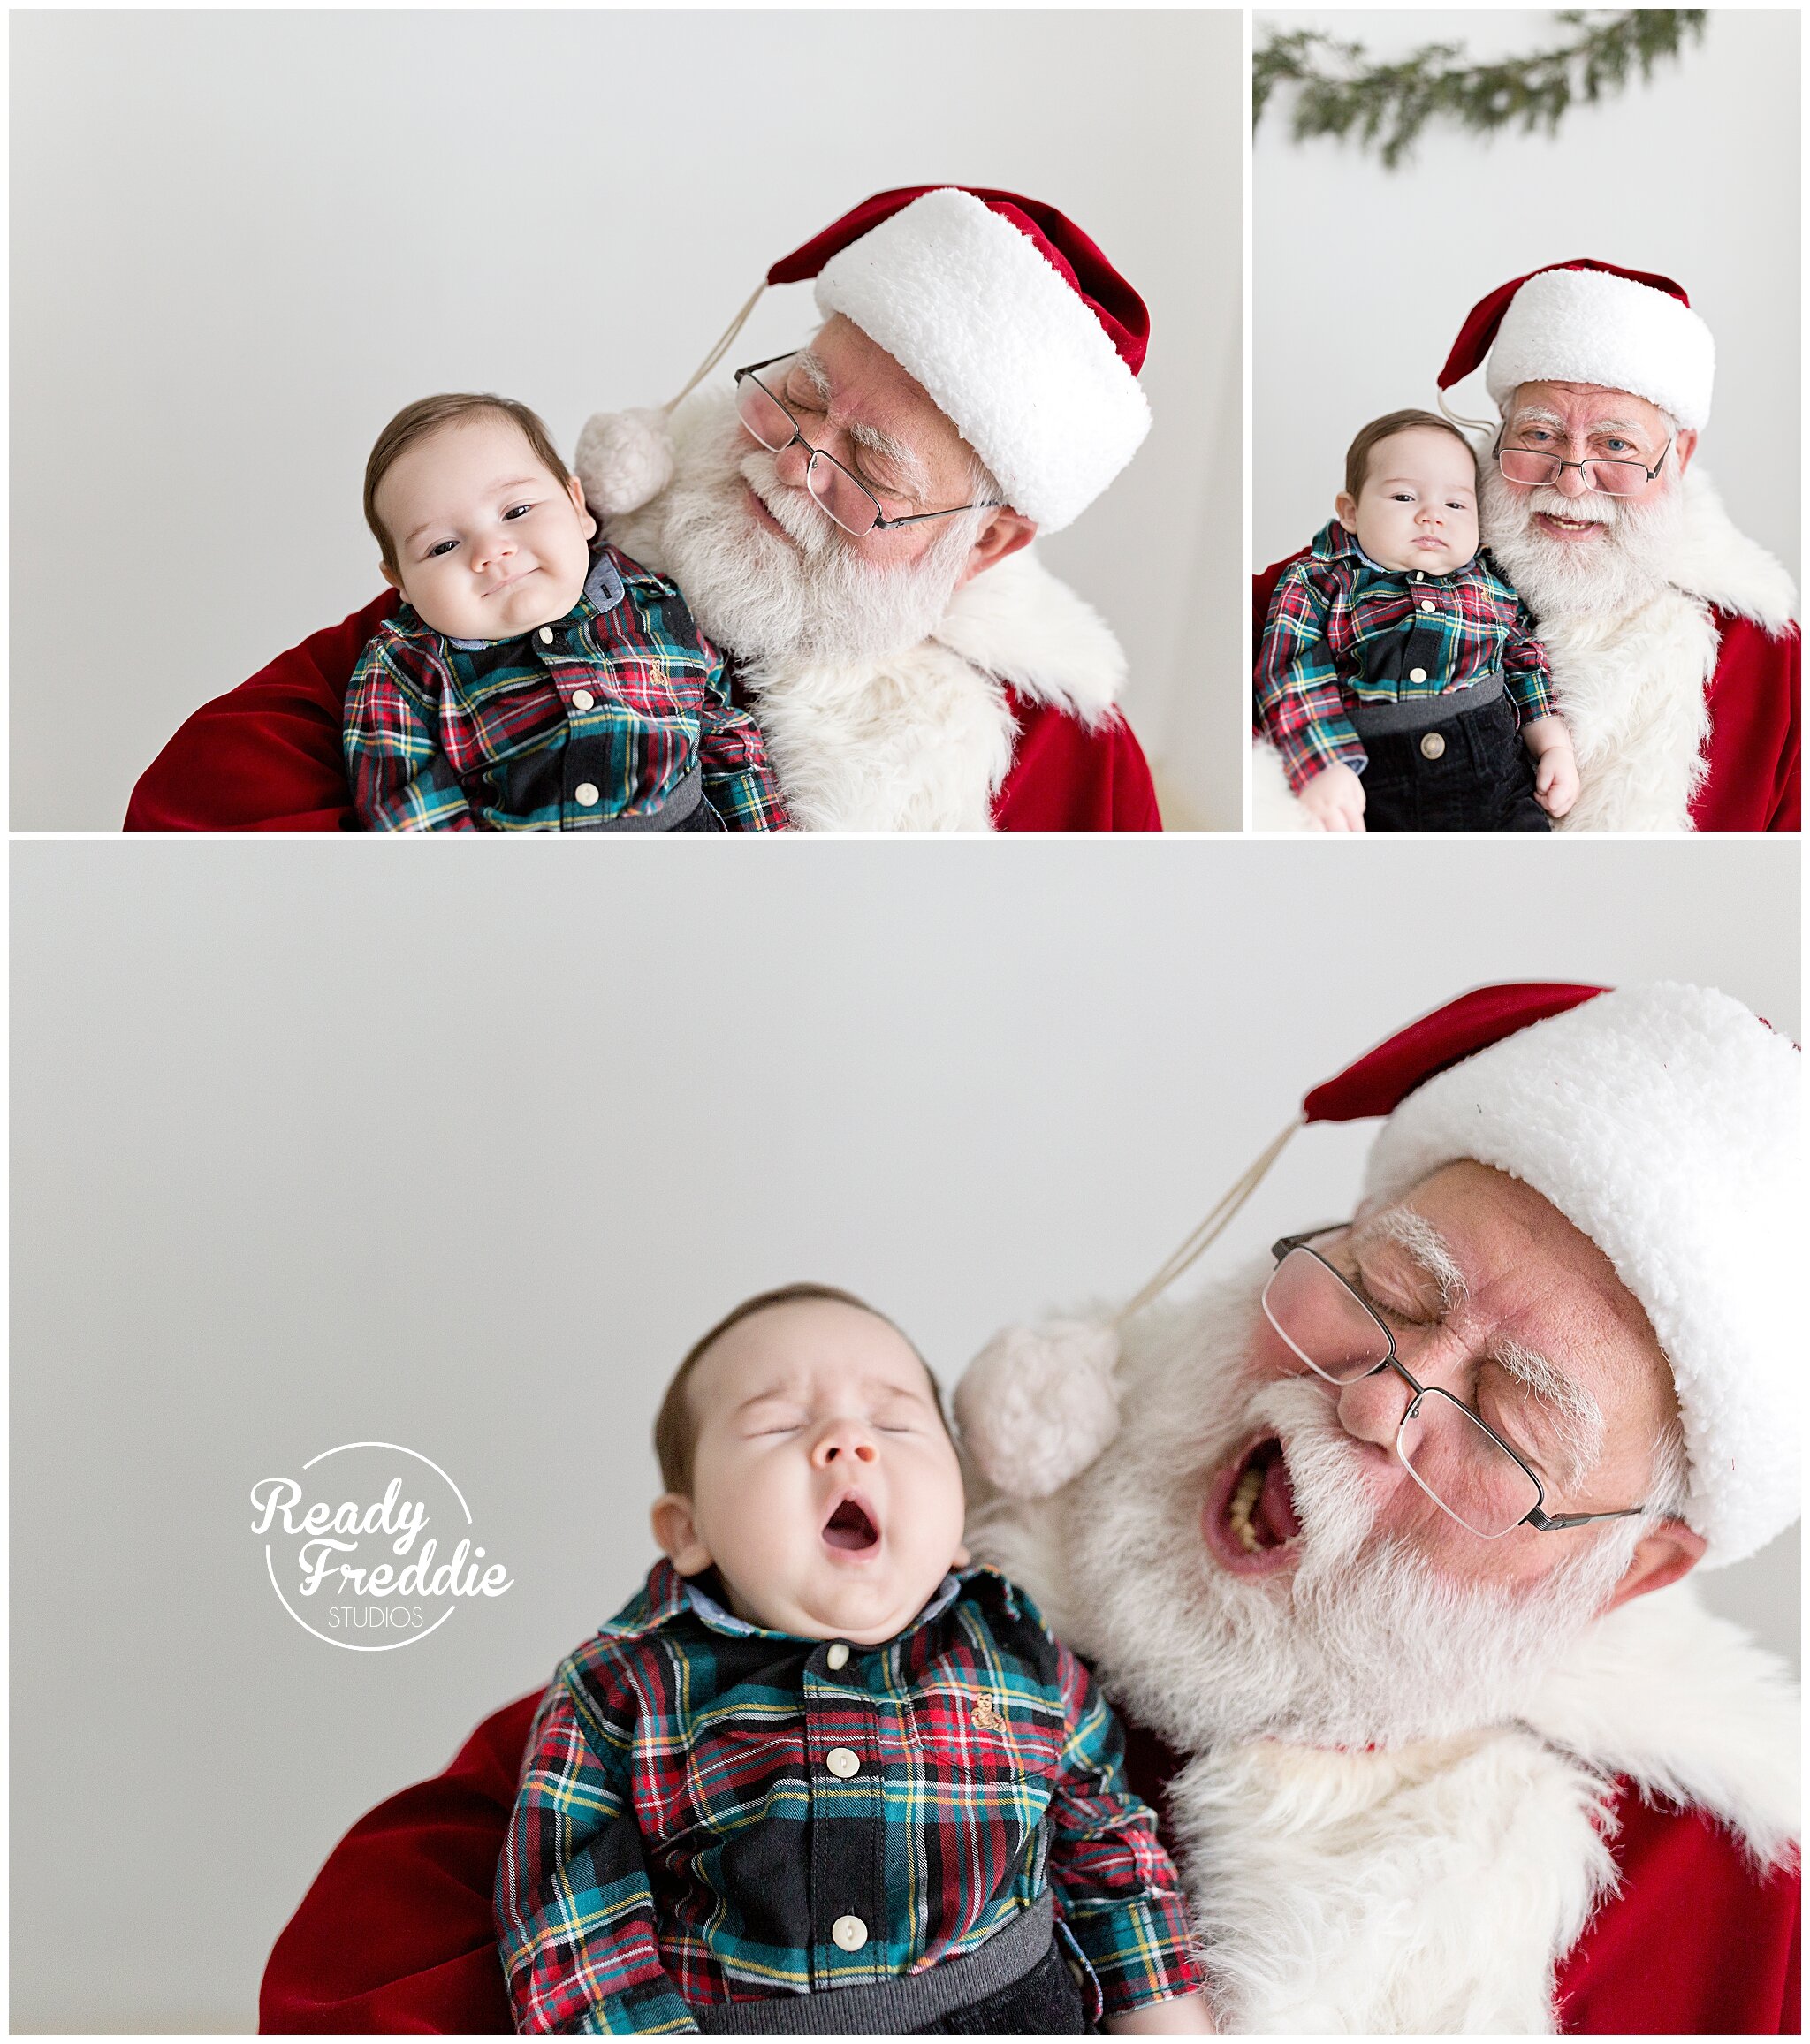 Baby's first Christmas photos and yawning with Santa and Ivanna Vidal Photography in Miami FL photo studio